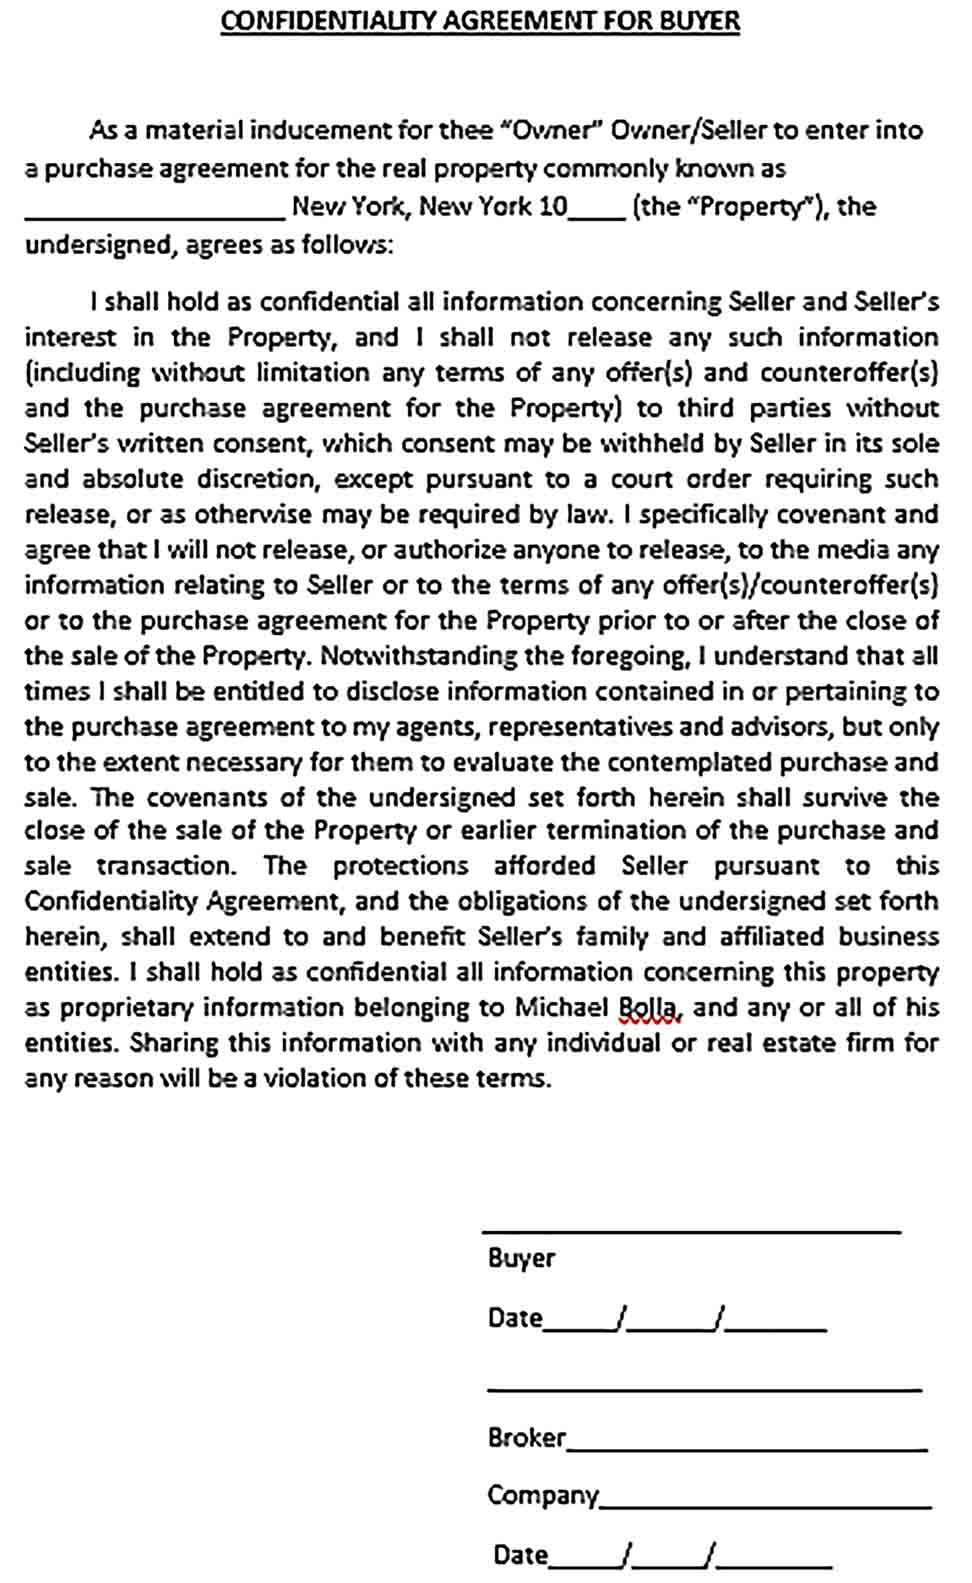 Sample Real Estate Confidentiality Agreement Form